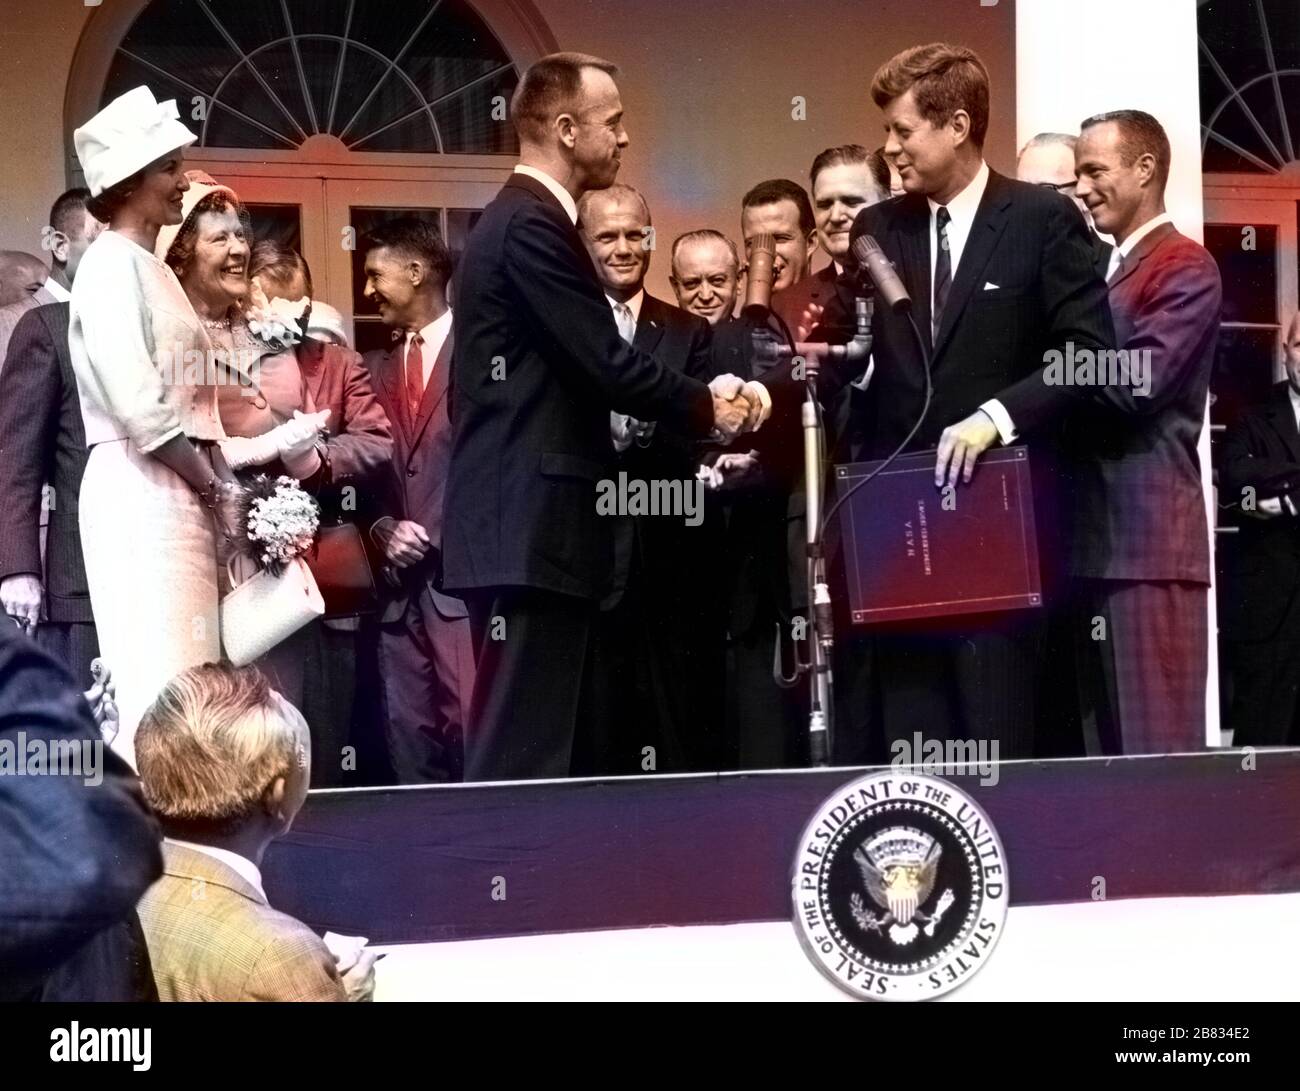 President John F. Kennedy congratulating astronaut Alan B. Shepard Jr. the first American in space, on his historic ride in the Freedom 7 spacecraft, White House, Washington, District of Columbia, May 8, 1961. Image courtesy National Aeronautics and Space Administration (NASA). Note: Image has been digitally colorized using a modern process. Colors may not be period-accurate. () Stock Photo